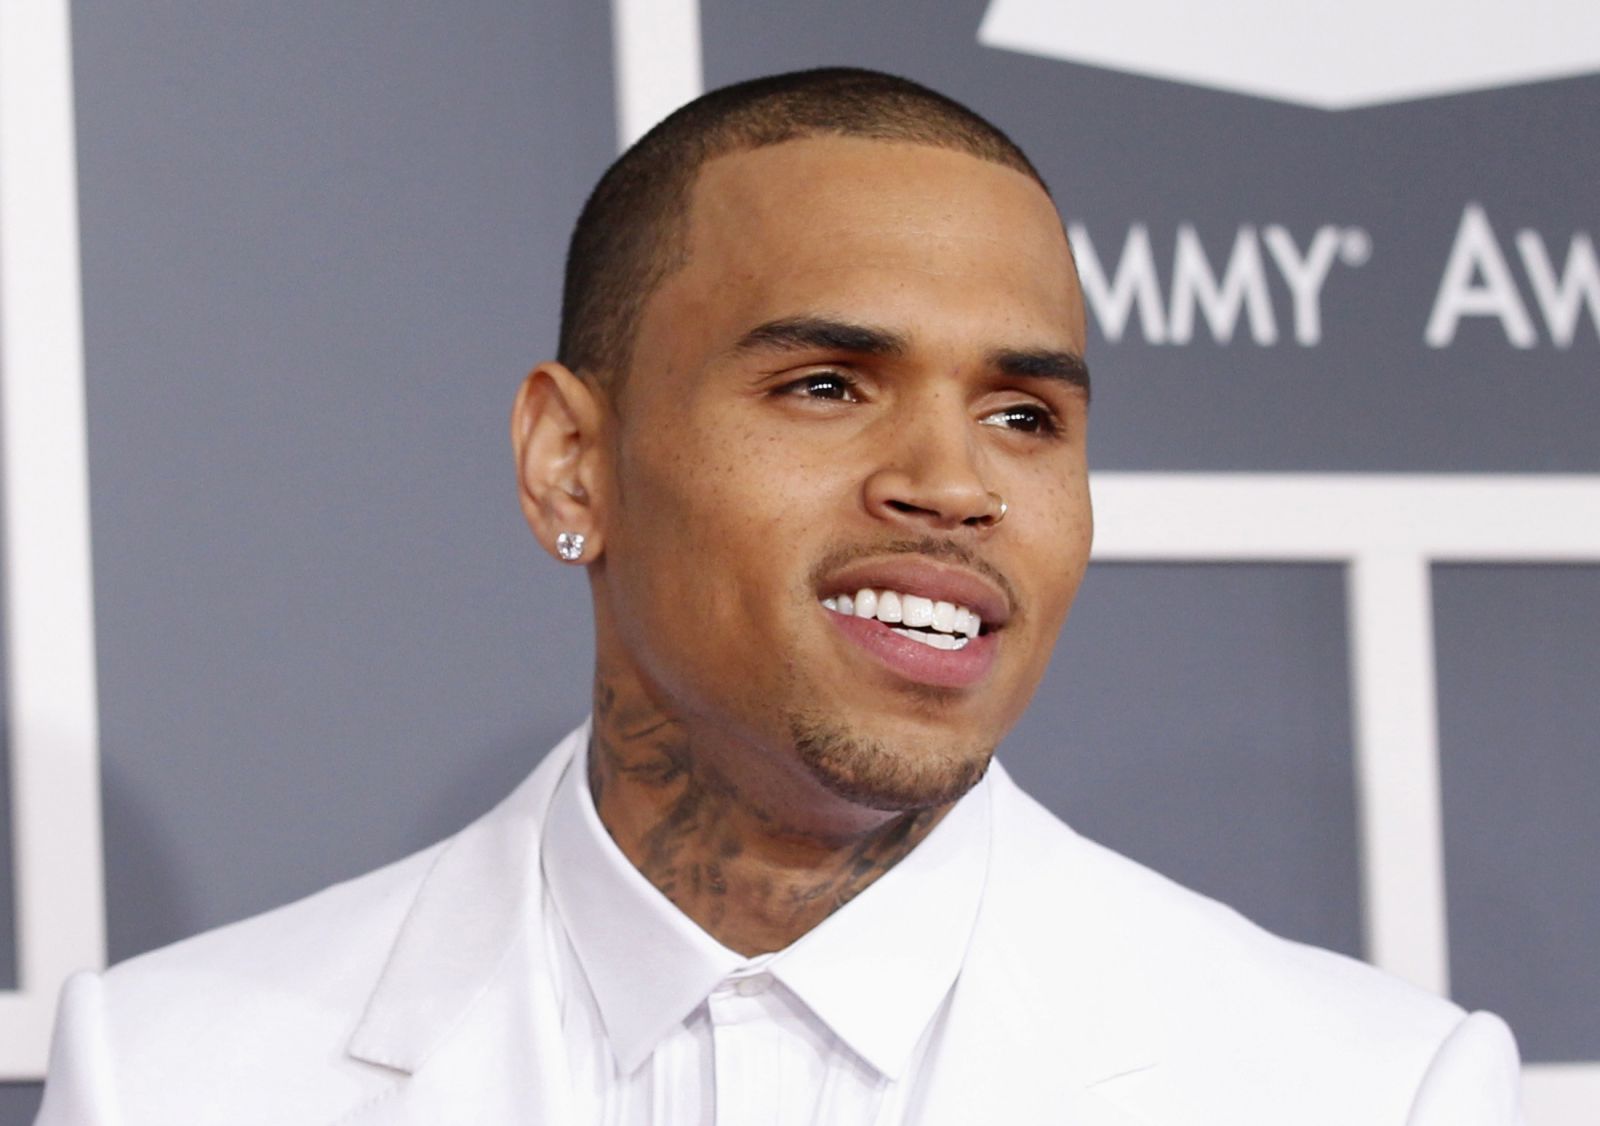 Chris Brown Welcomed Home From Jail With Star Studded Surprise